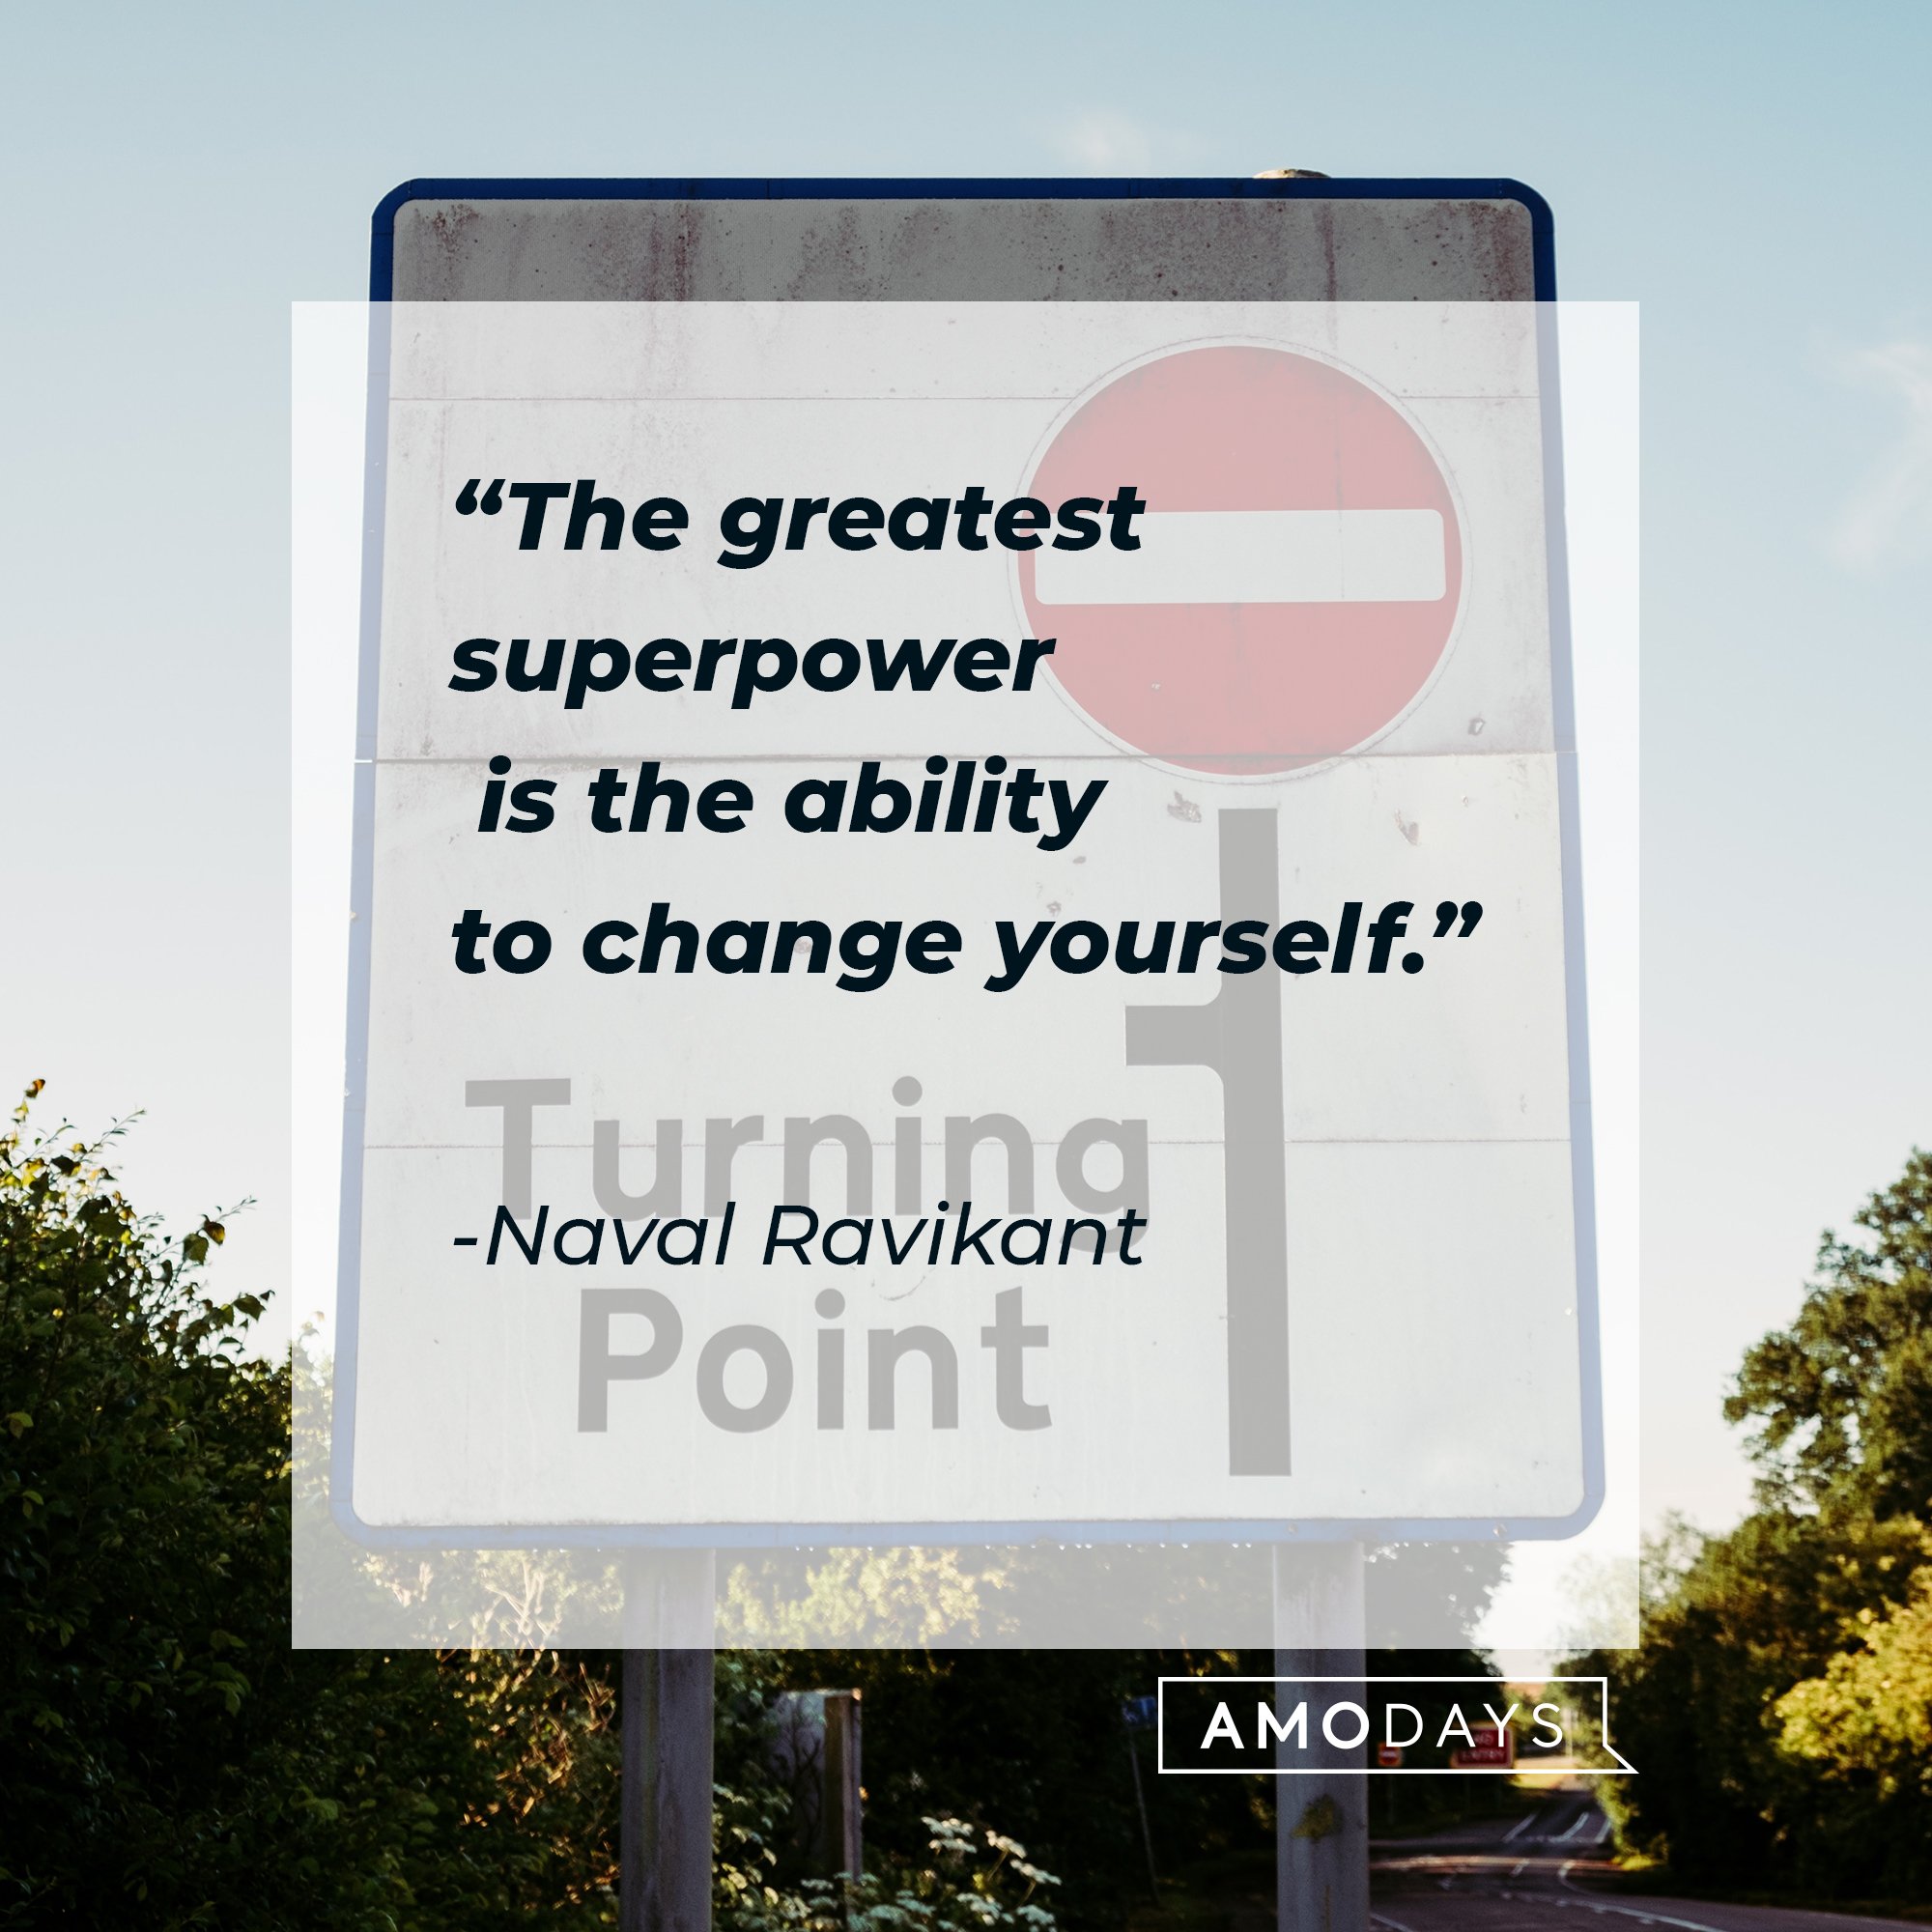 Naval Ravikant's quote: "The greatest superpower is the ability to change yourself." | Image: AmoDays